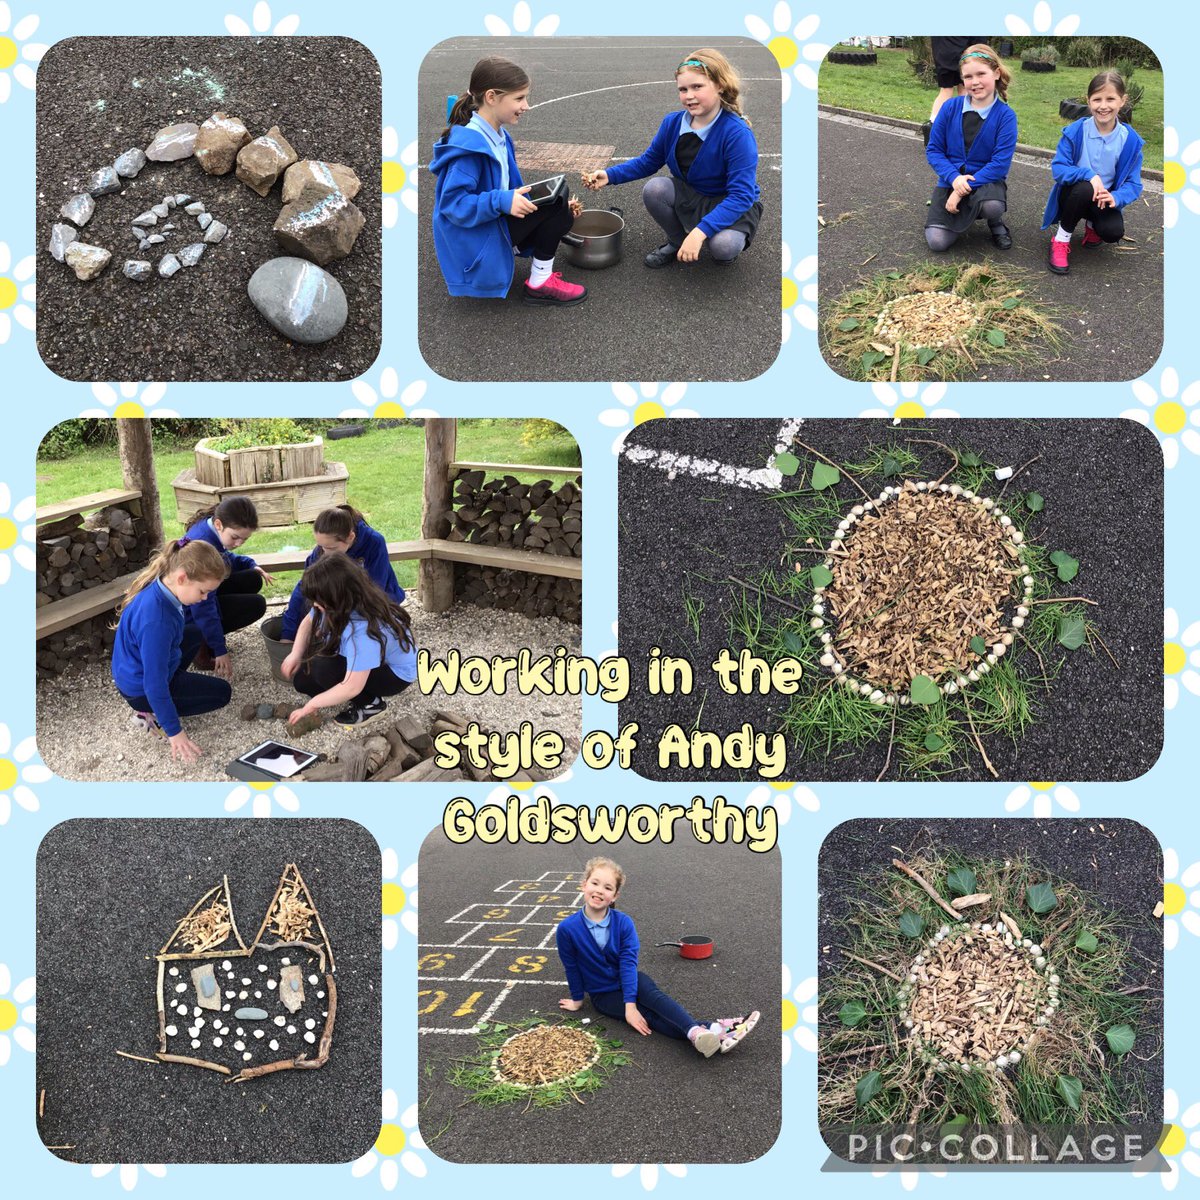 ⭐️Blwyddyn 5⭐️ For #outdoorlearningweek last week we were inspired by Andy Goldsworthy. We created pieces of art in his style using natural materials. We investigated pattern and used stones, twigs, flowers, shells and leaves to create our art. 🌿🪵🐚🌾⭐️ @_OLW_ @GoldsworthyAndy